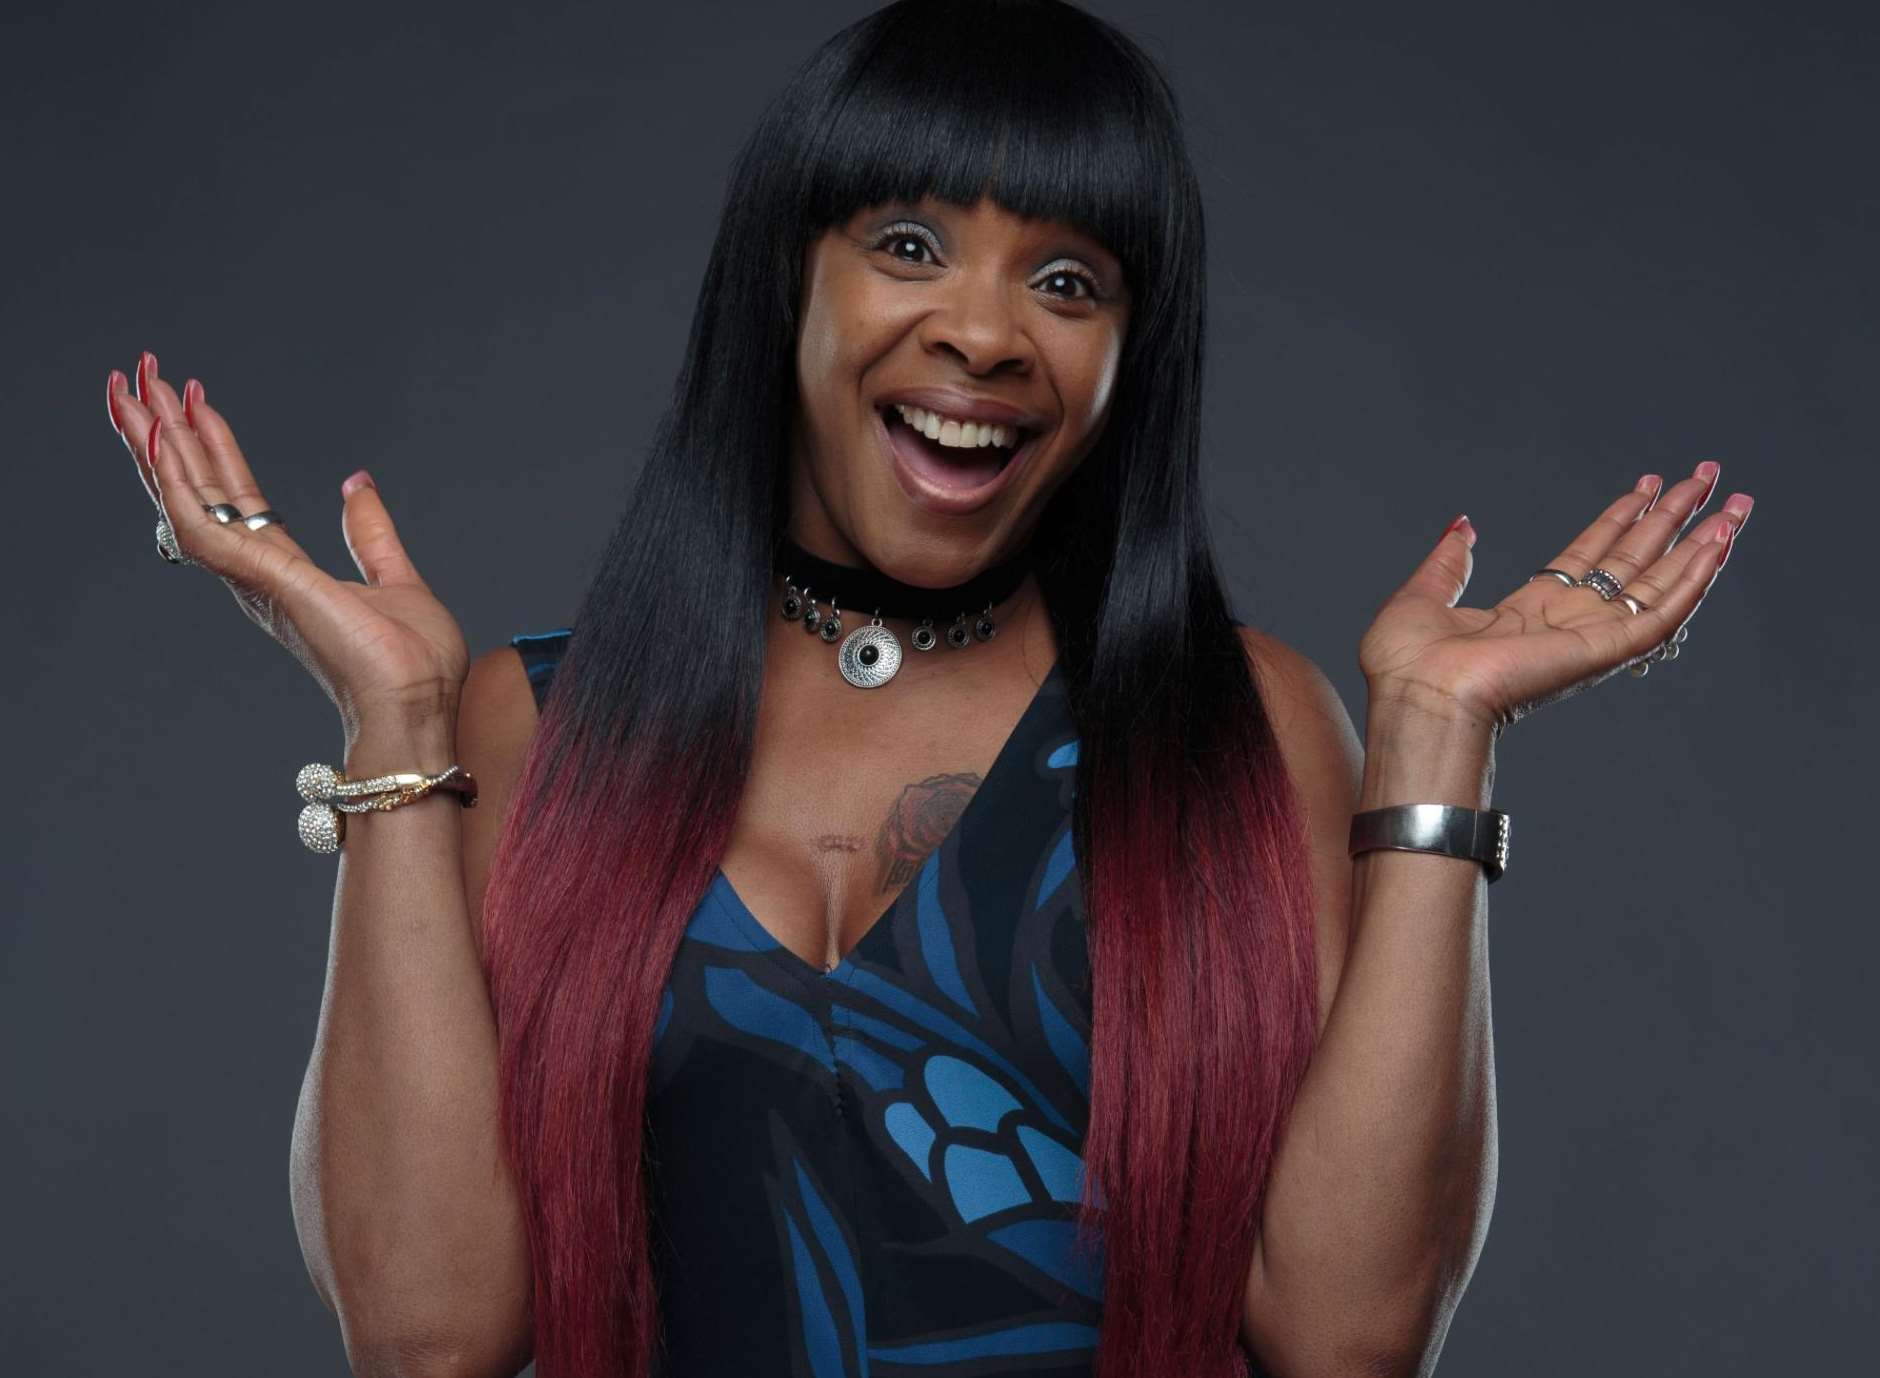 Sandi from Gogglebox will be at the Paddock Wood Christmas lights switch-on